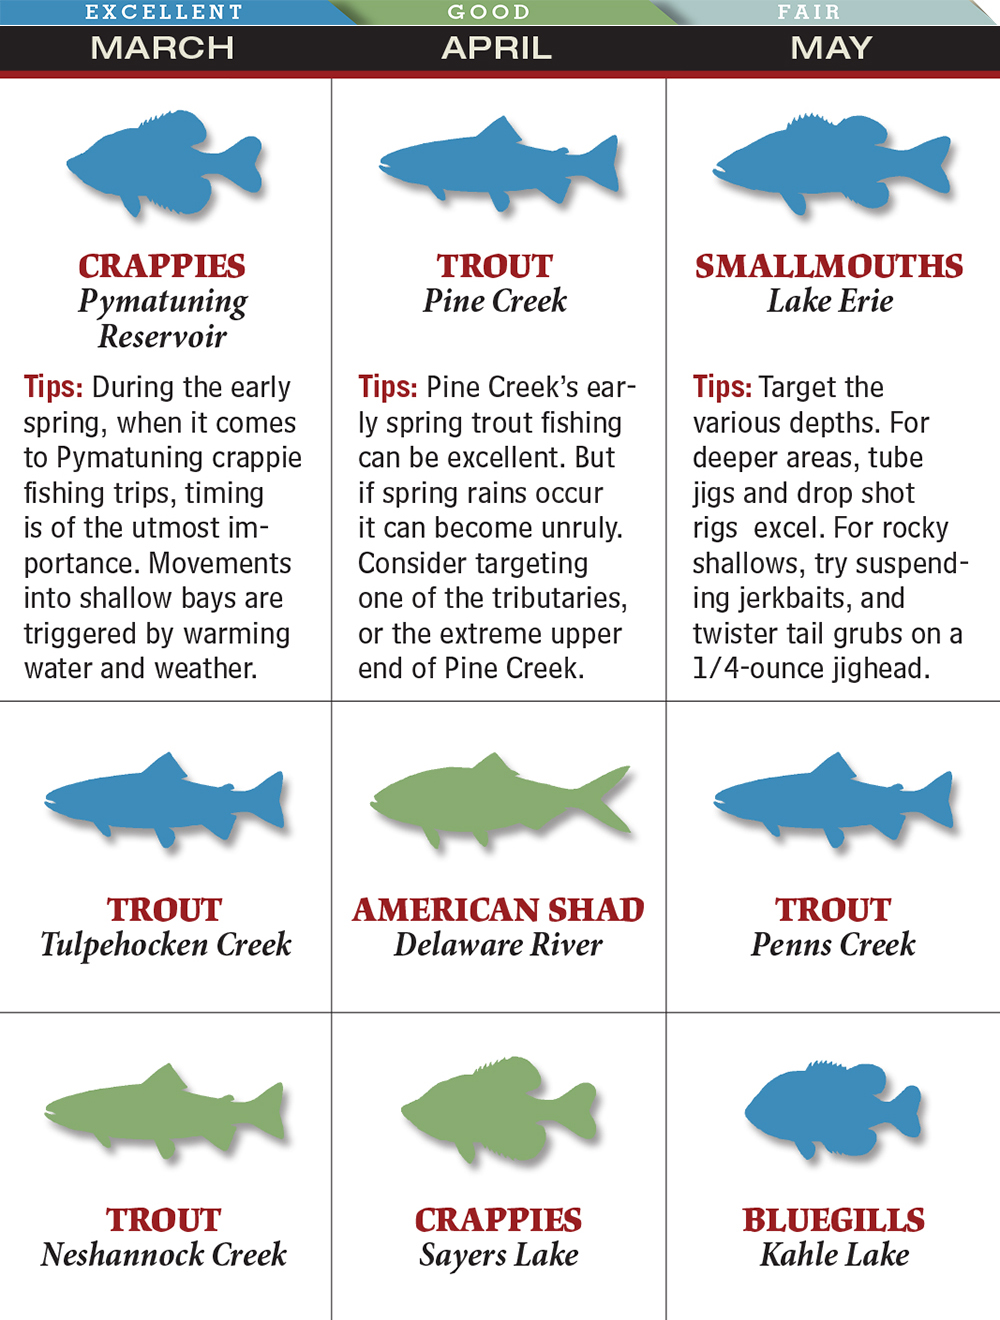 Complete 2013 Freshwater Fishing DIGEST - State of New Jersey